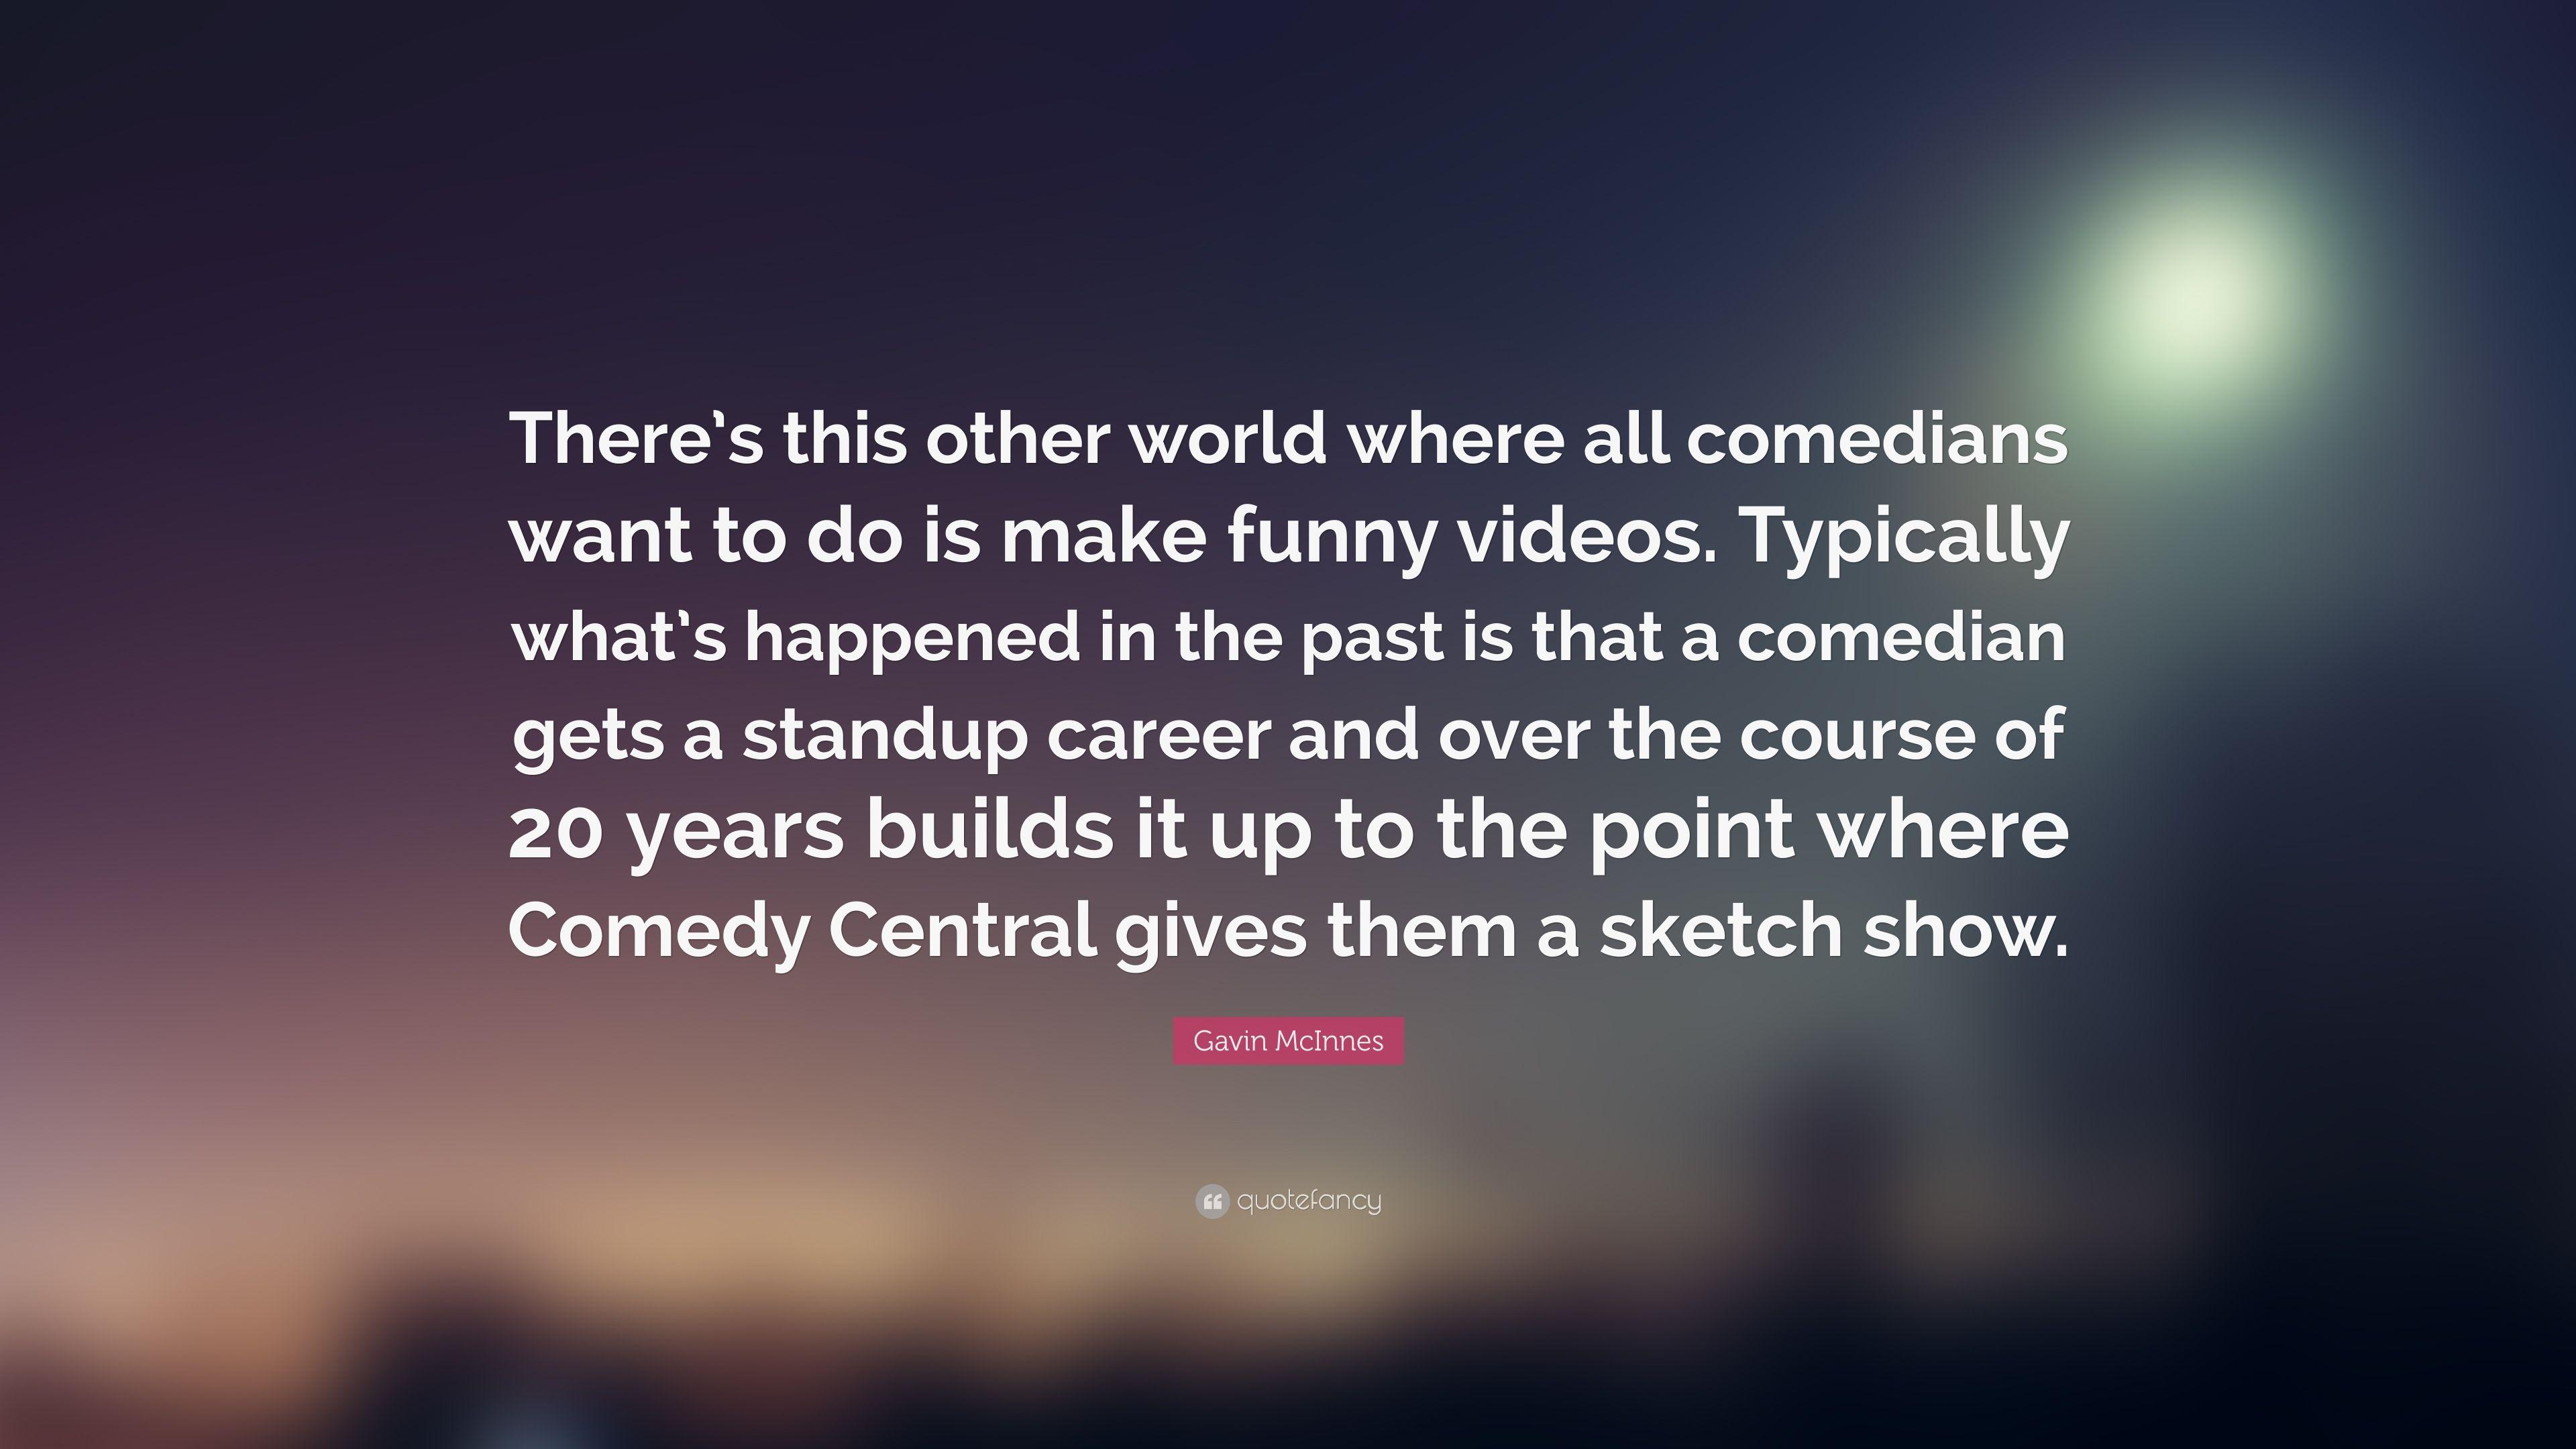 Gavin McInnes Quote: “There's this other world where all comedians